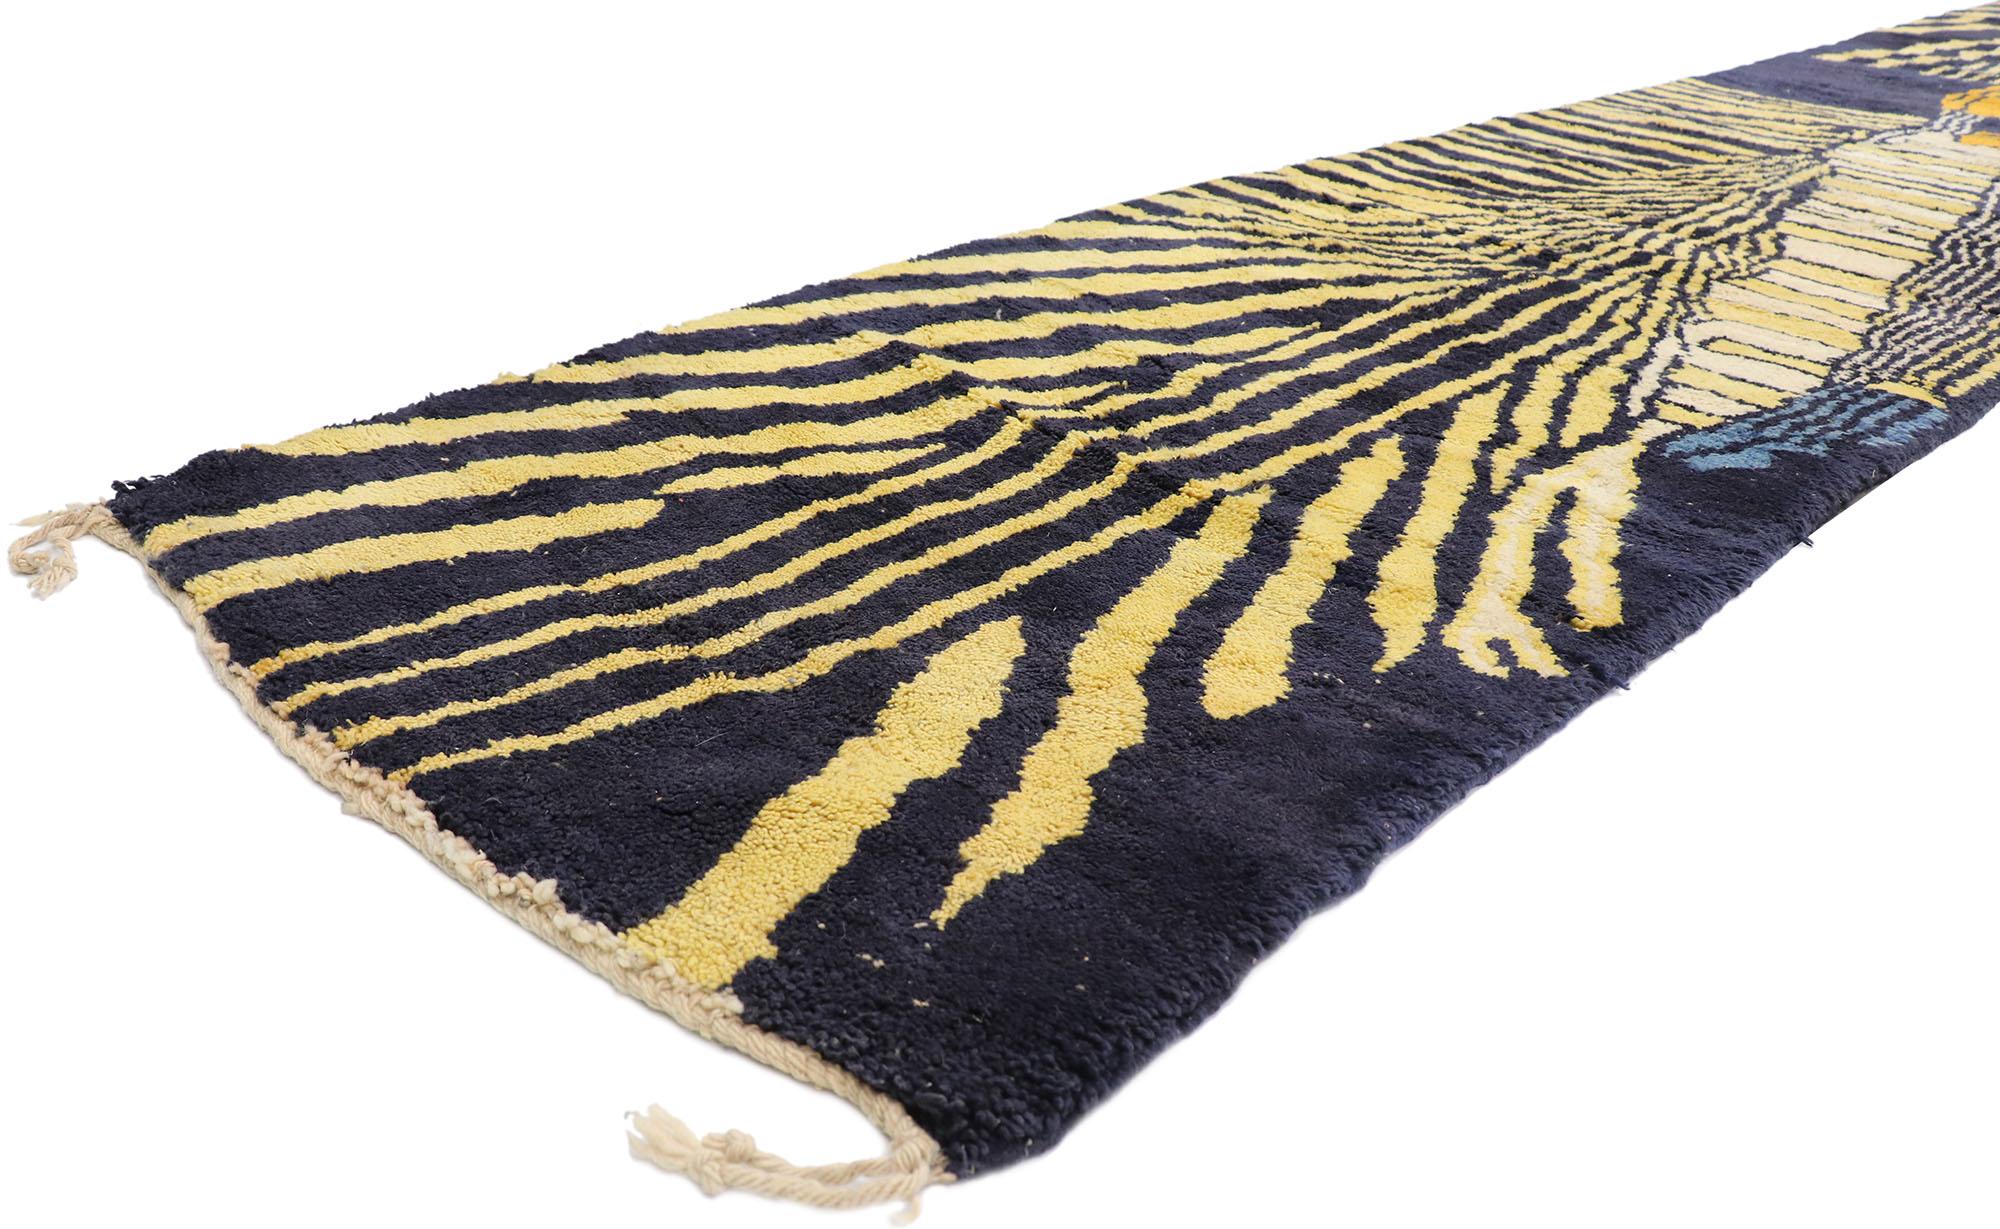 21134 New Extra-Long Berber Moroccan rug runner with Abstract Biophilic Design 03'02 x 23'09. Reflecting elements of nature with a twist of abstract expressionism, this hand knotted wool contemporary Berber Moroccan runner awakens the soul with